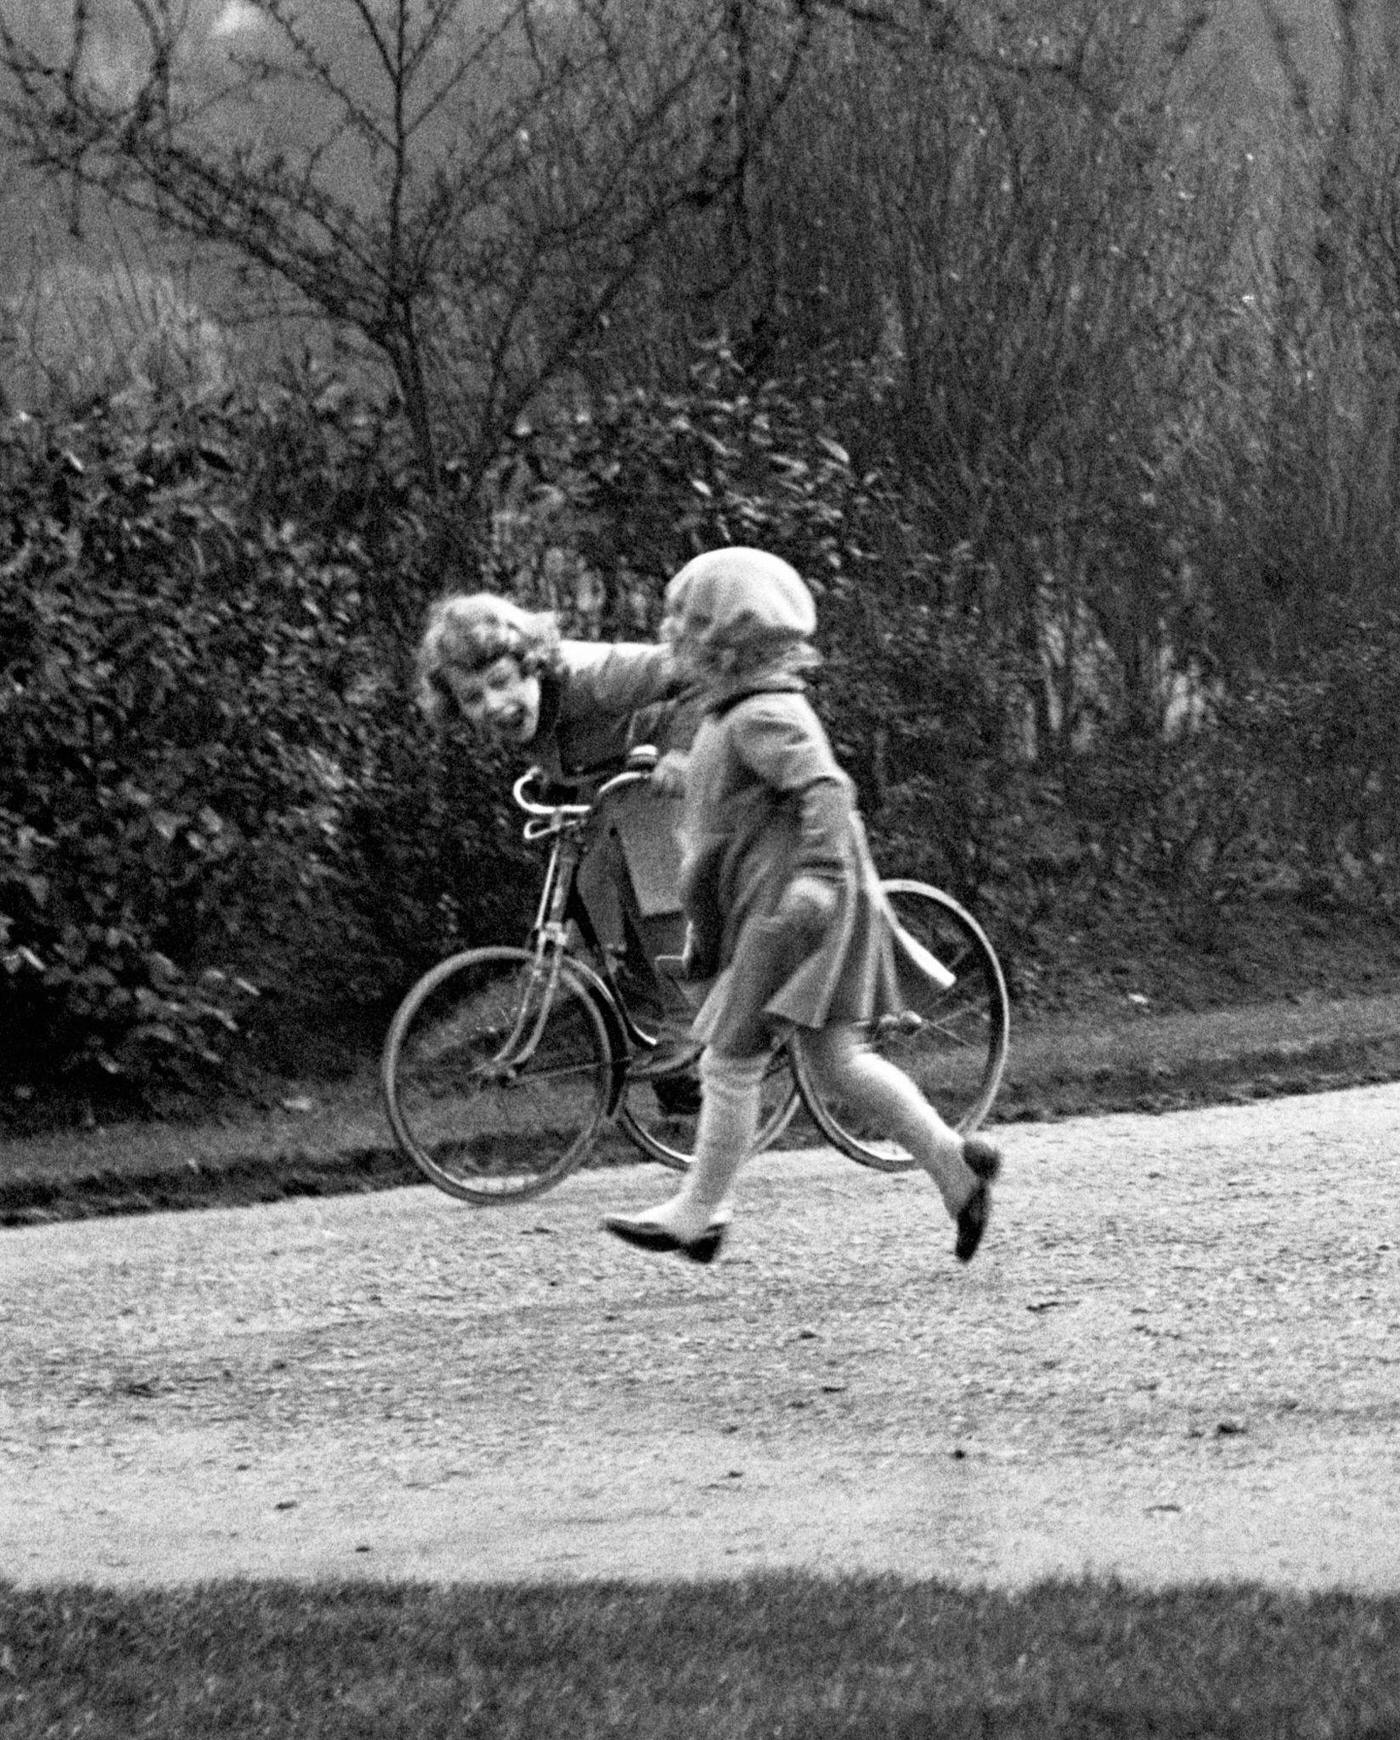 Princess Elizabeth (later Queen Elizabeth II) is pictured on a tricycle in the park in this royalty photo.